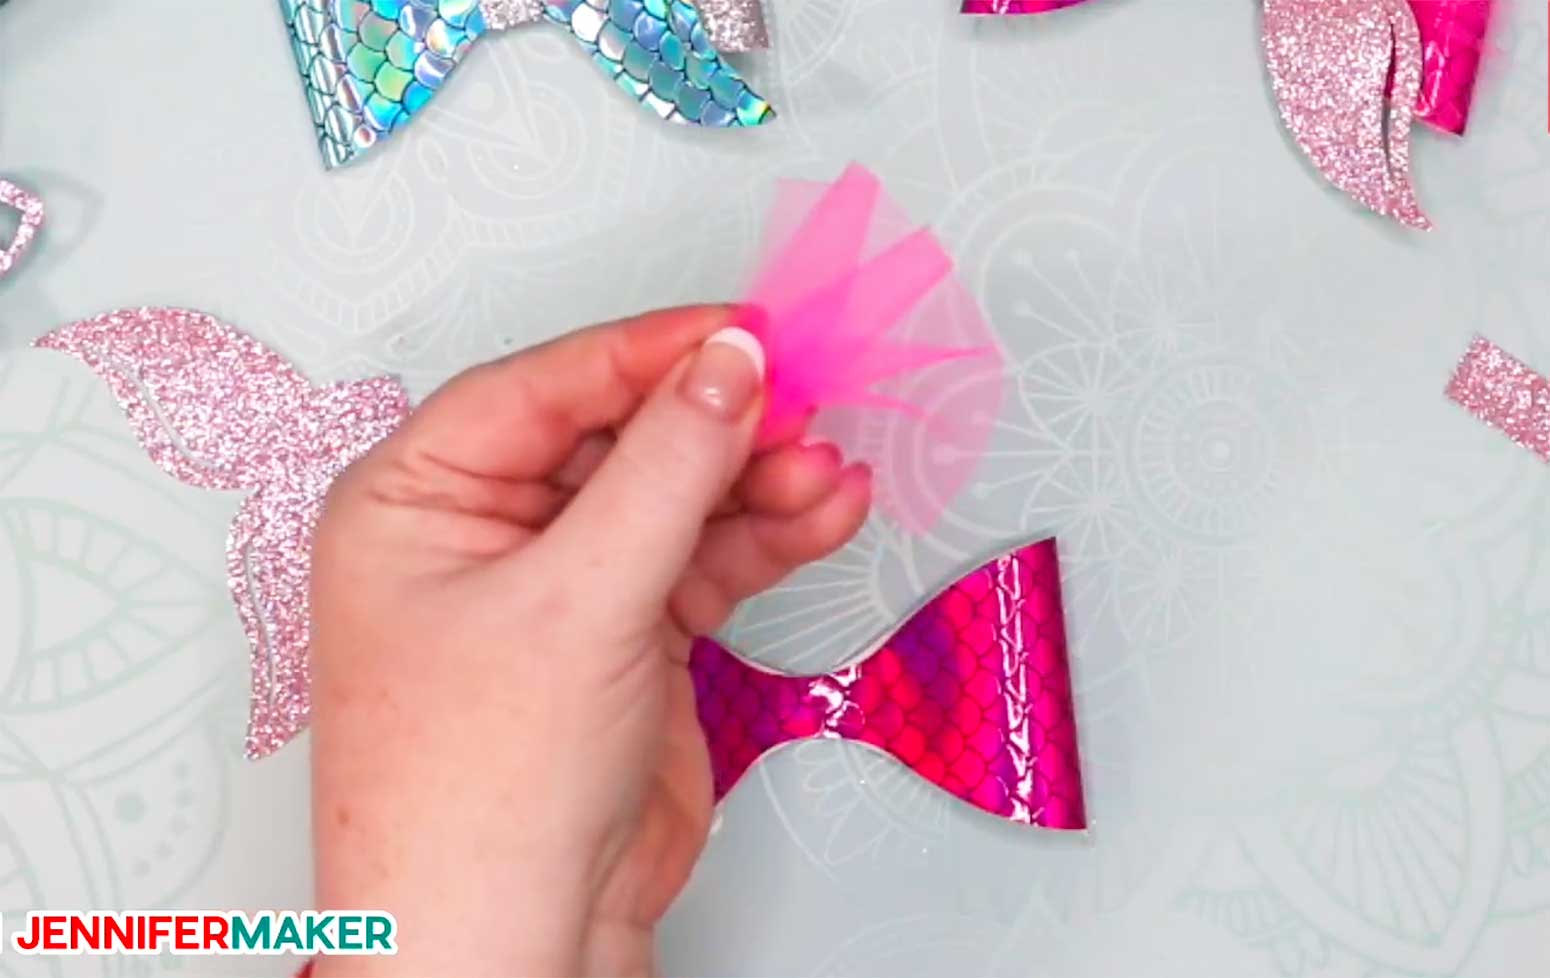 Pink tulle folded in a fan shape to make hair bows with mermaid tails